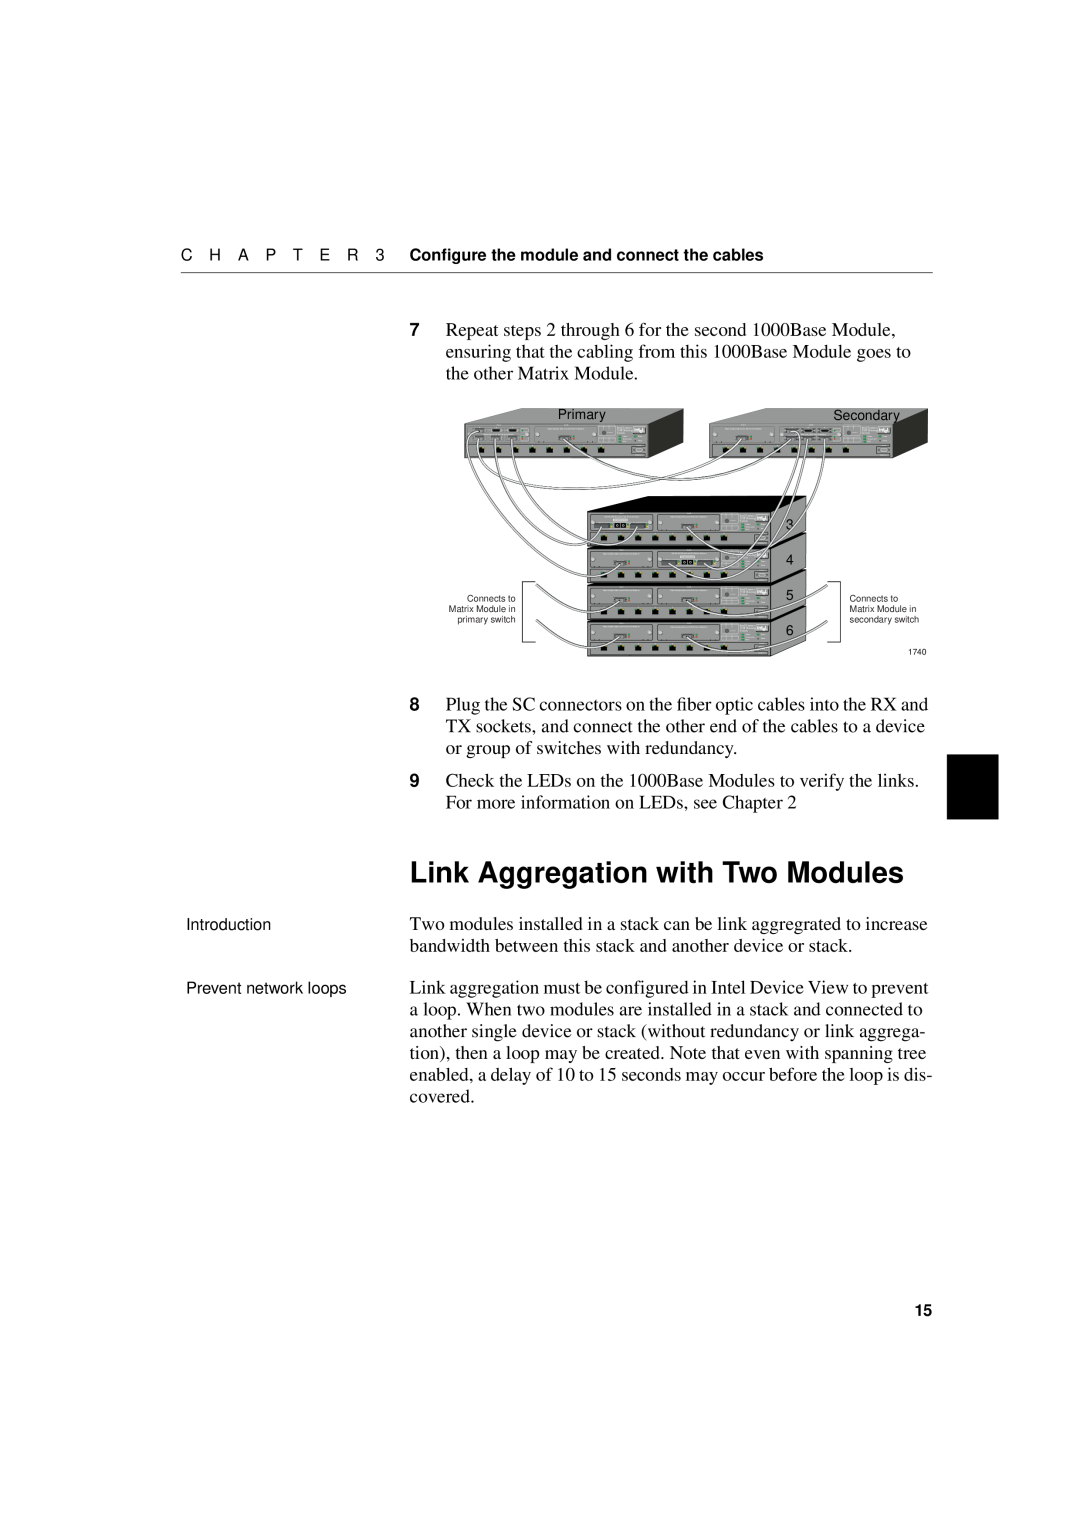 Intel 1000SX, 1000LX manual Link Aggregation with Two Modules, Introduction Prevent network loops 